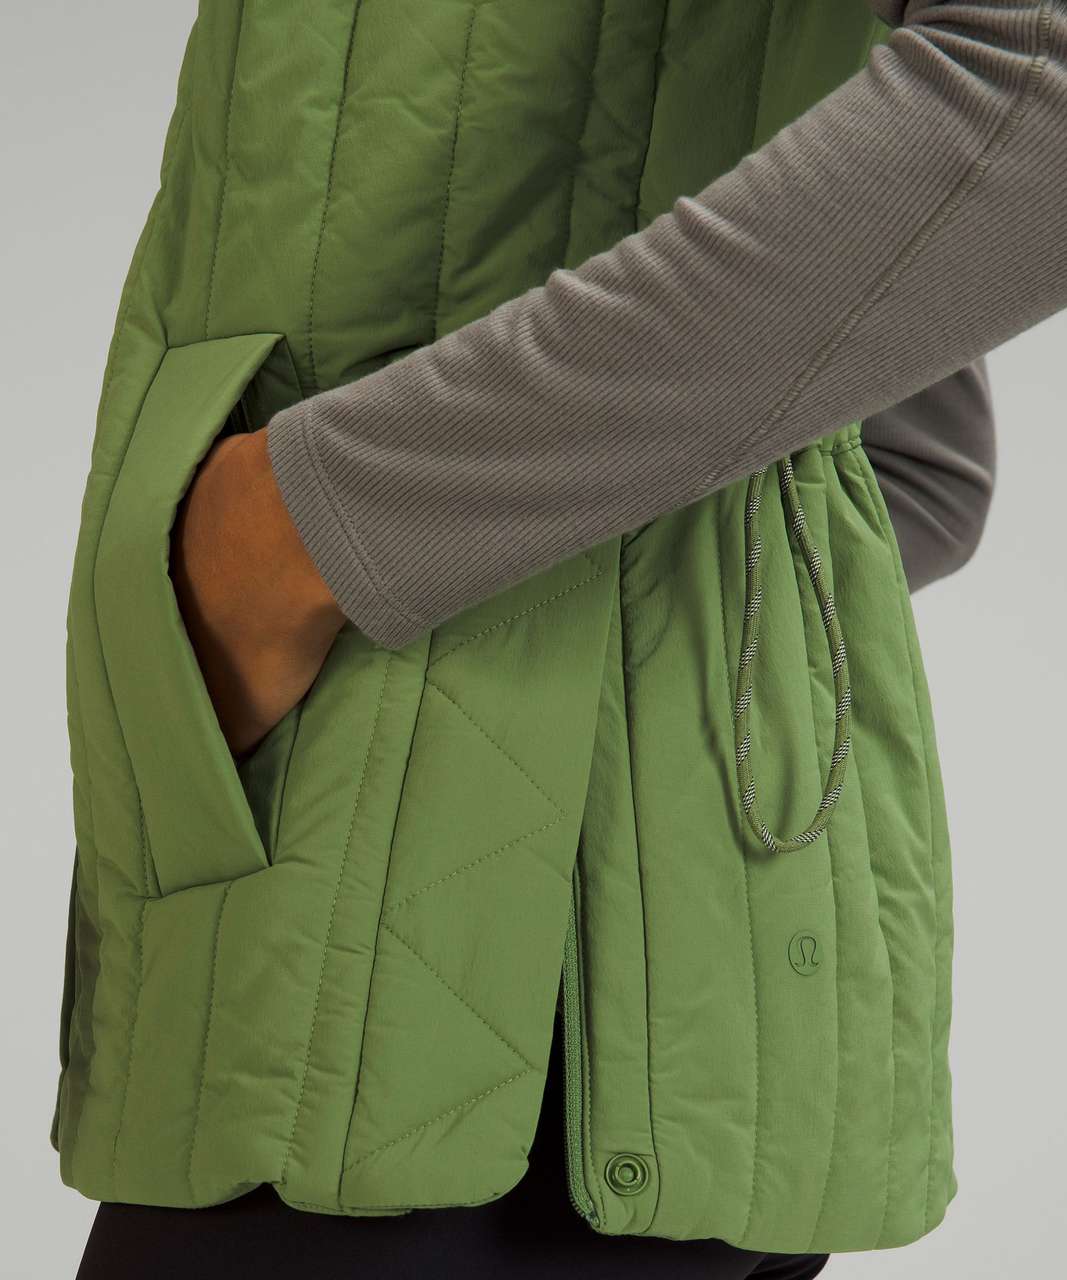 Lululemon Water-Repellent Insulated Vest - Green Foliage